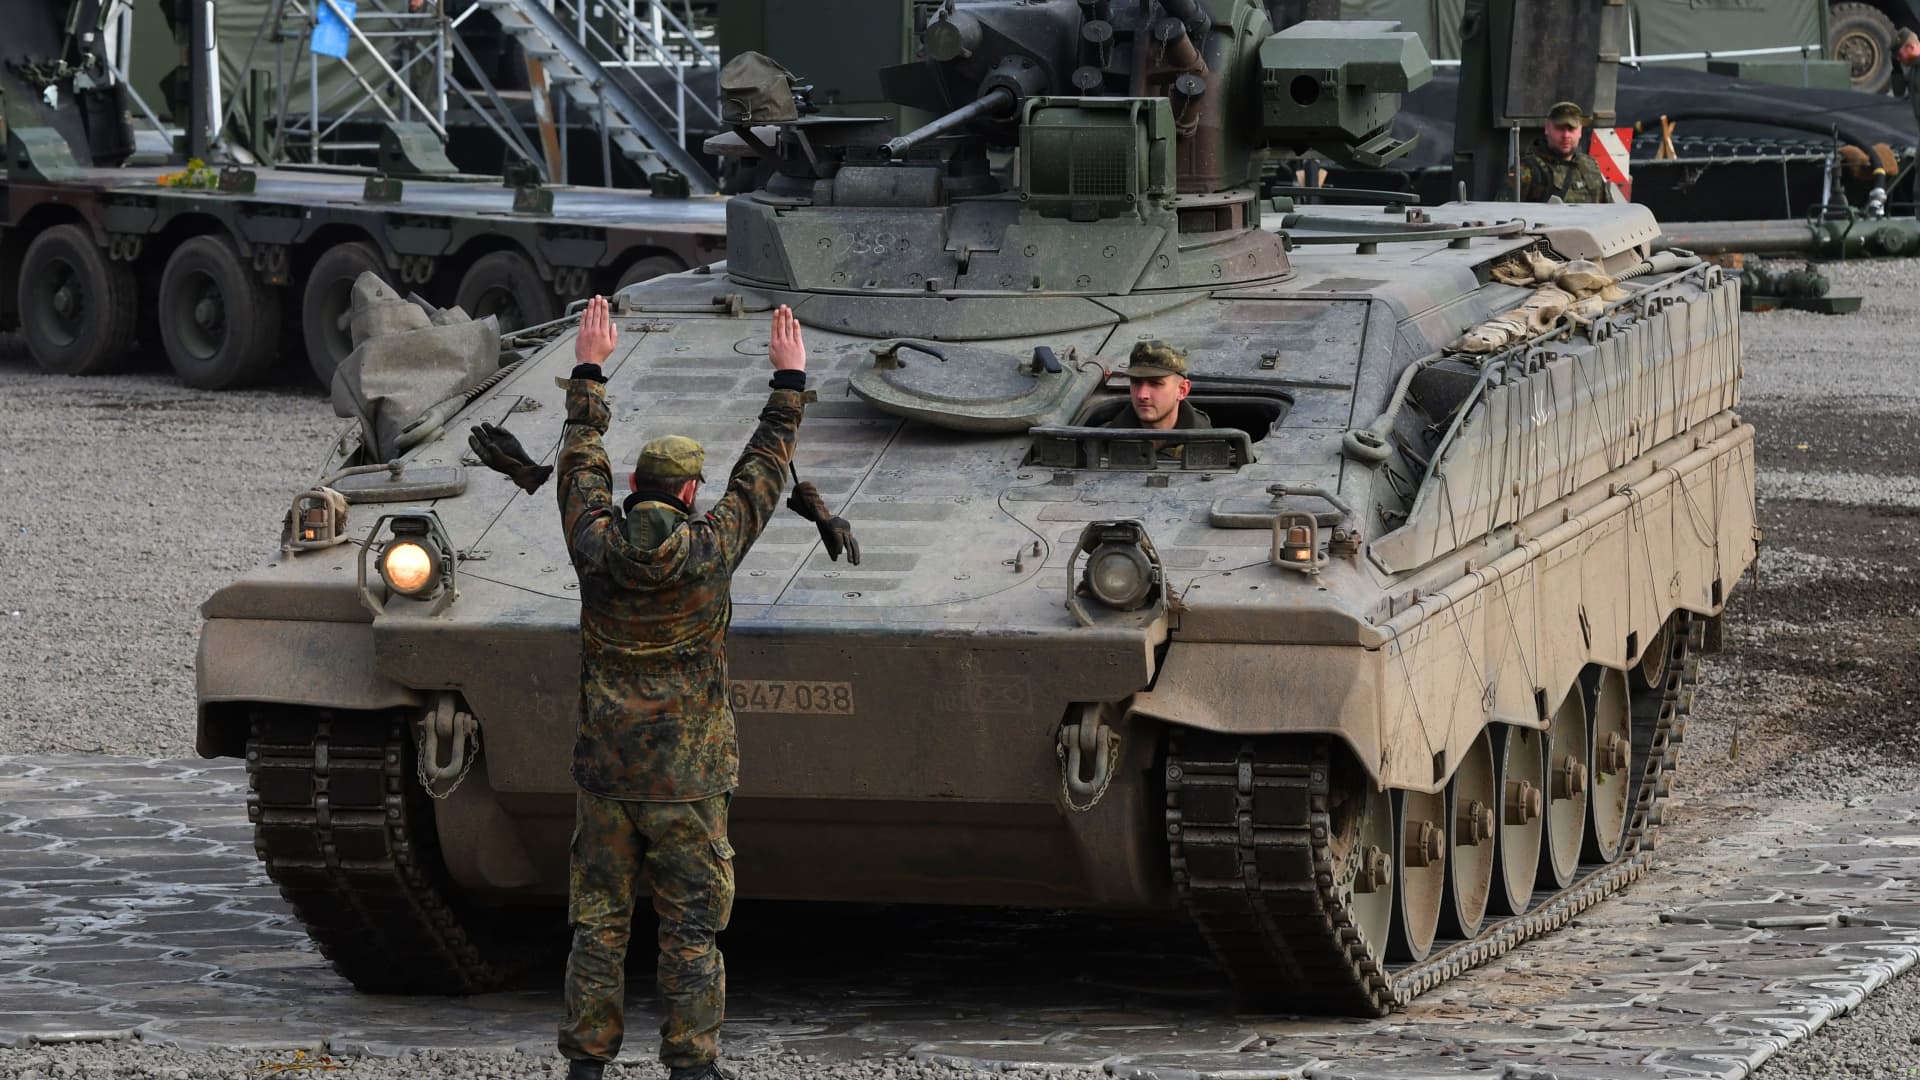 Germany promised Ukraine weapons but hasn’t delivered. Now anger toward Berlin is rising – CNBC